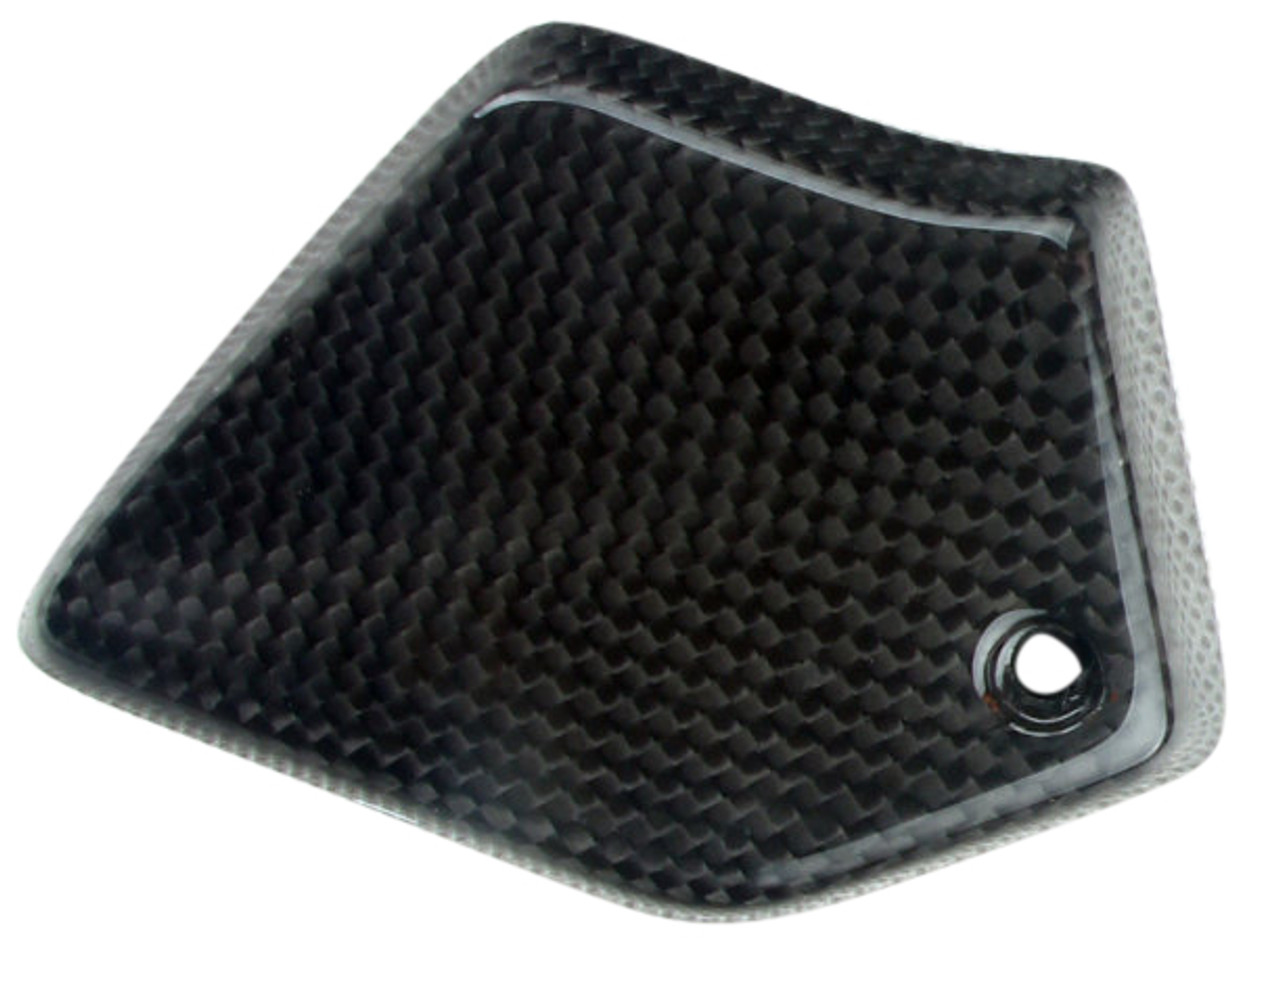 Ignition Coil Cover in Glossy Twill Weave Carbon Fiber for MV Agusta Brutale 675/800